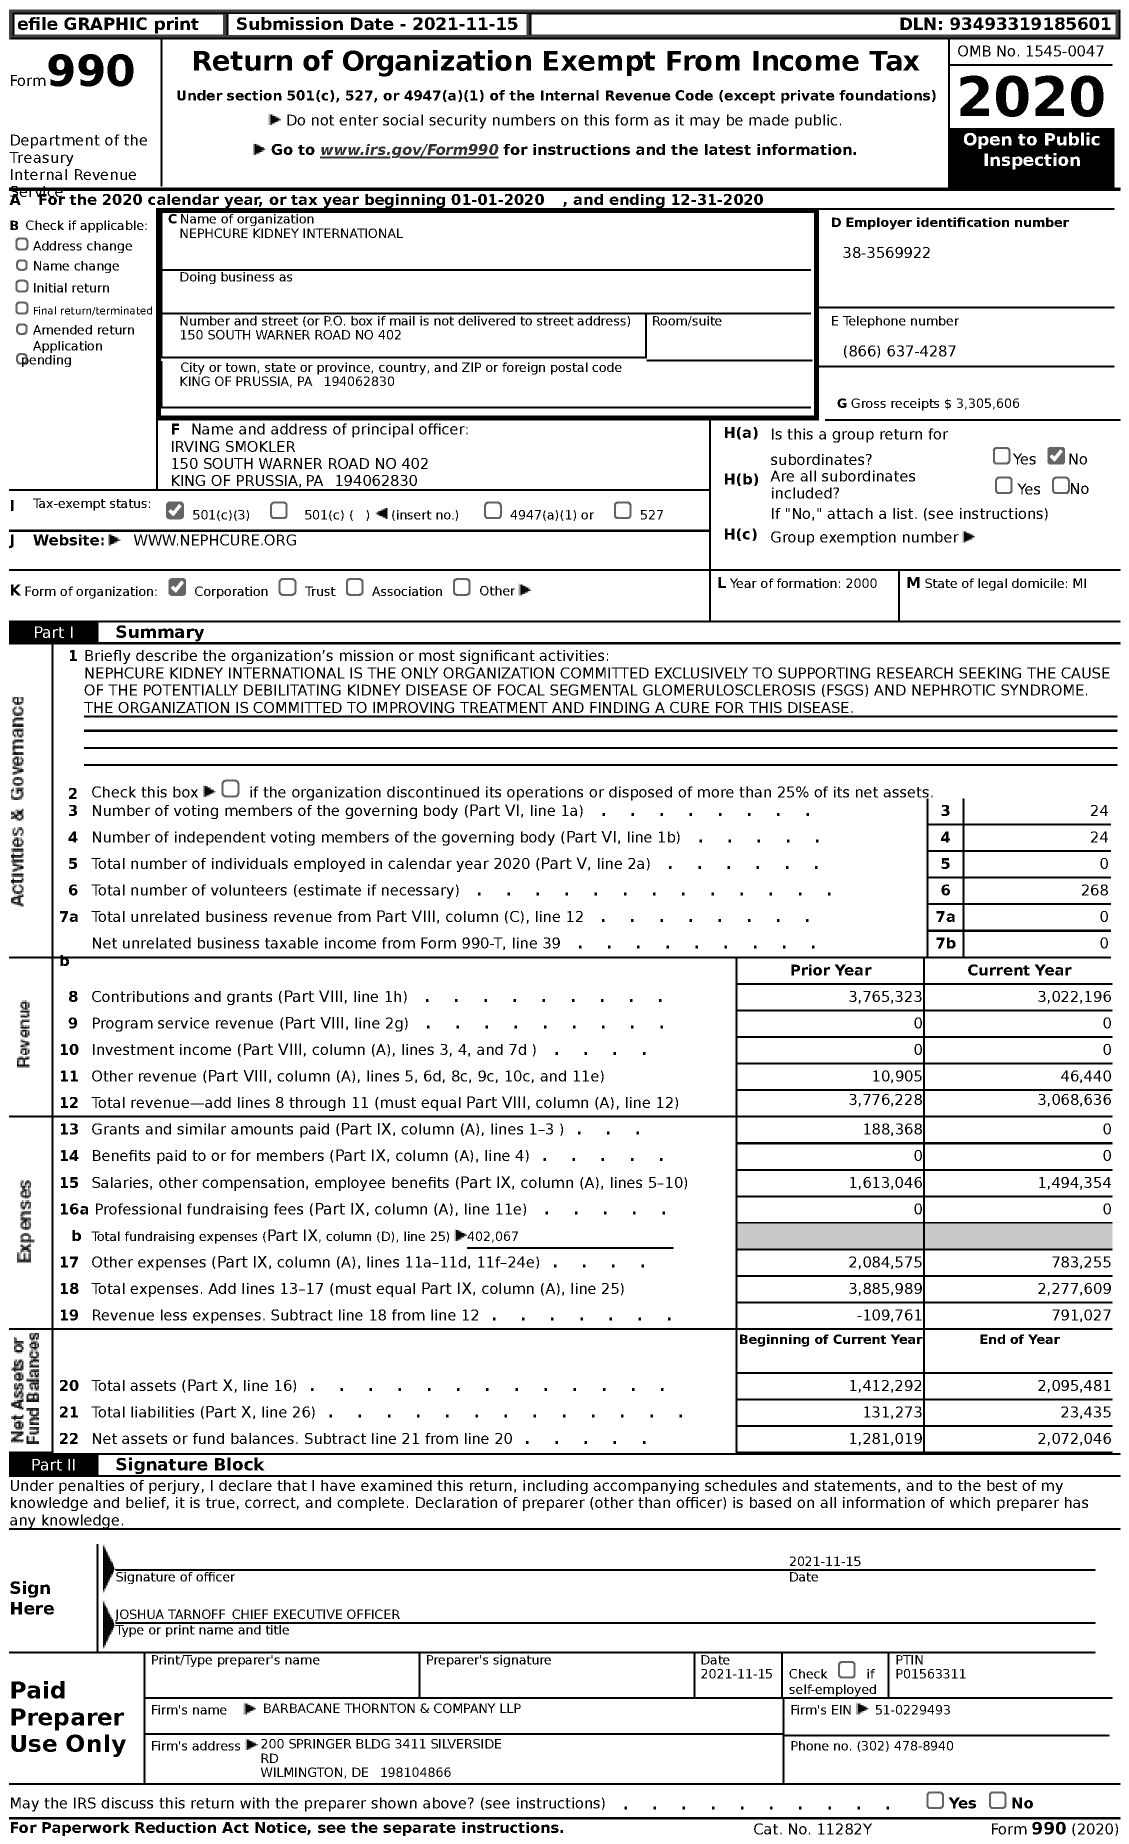 Image of first page of 2020 Form 990 for Nephcure Kidney International (NKI)